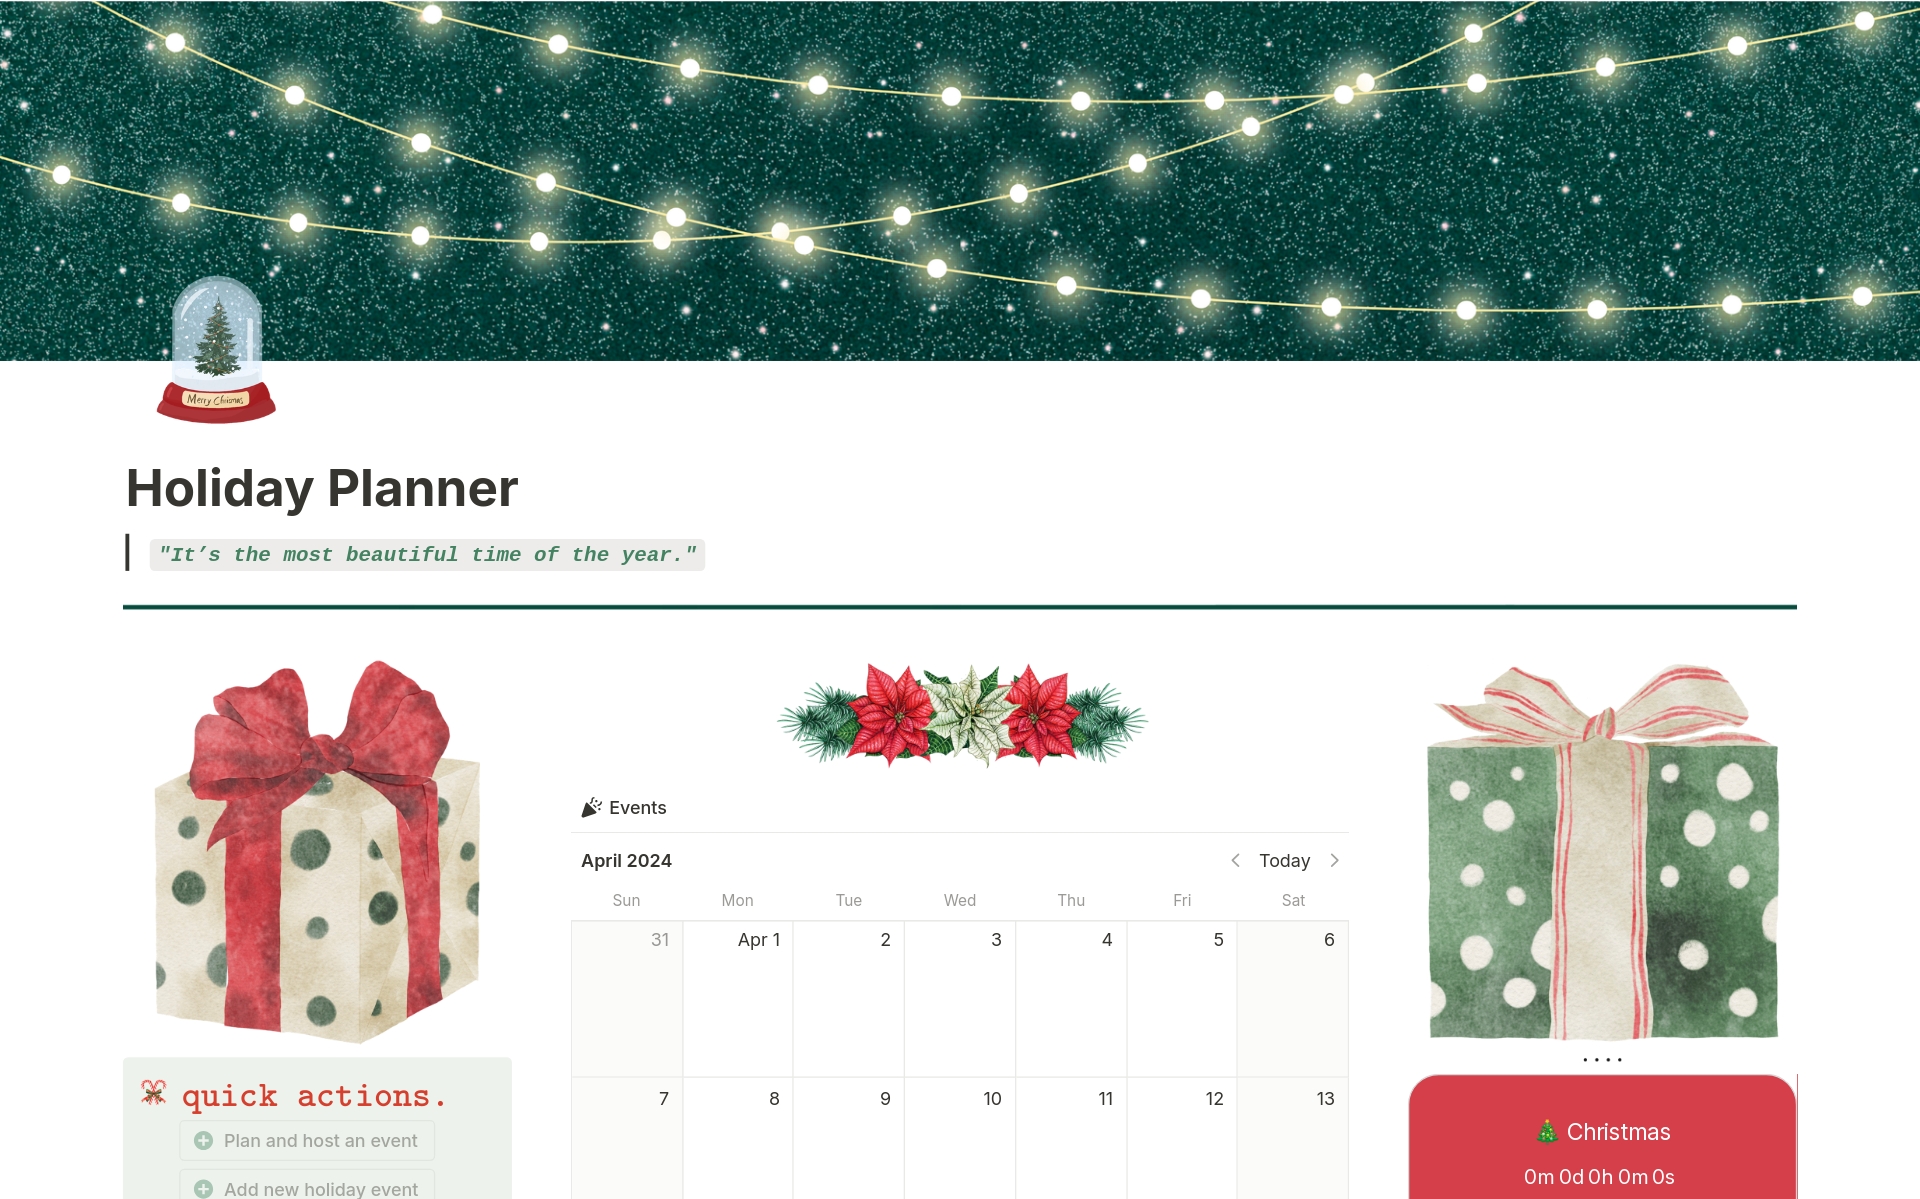 Say goodbye to the chaos and hello to festive zen with our intuitive, easy-to-use Notion Holiday Planner designed for all ages.